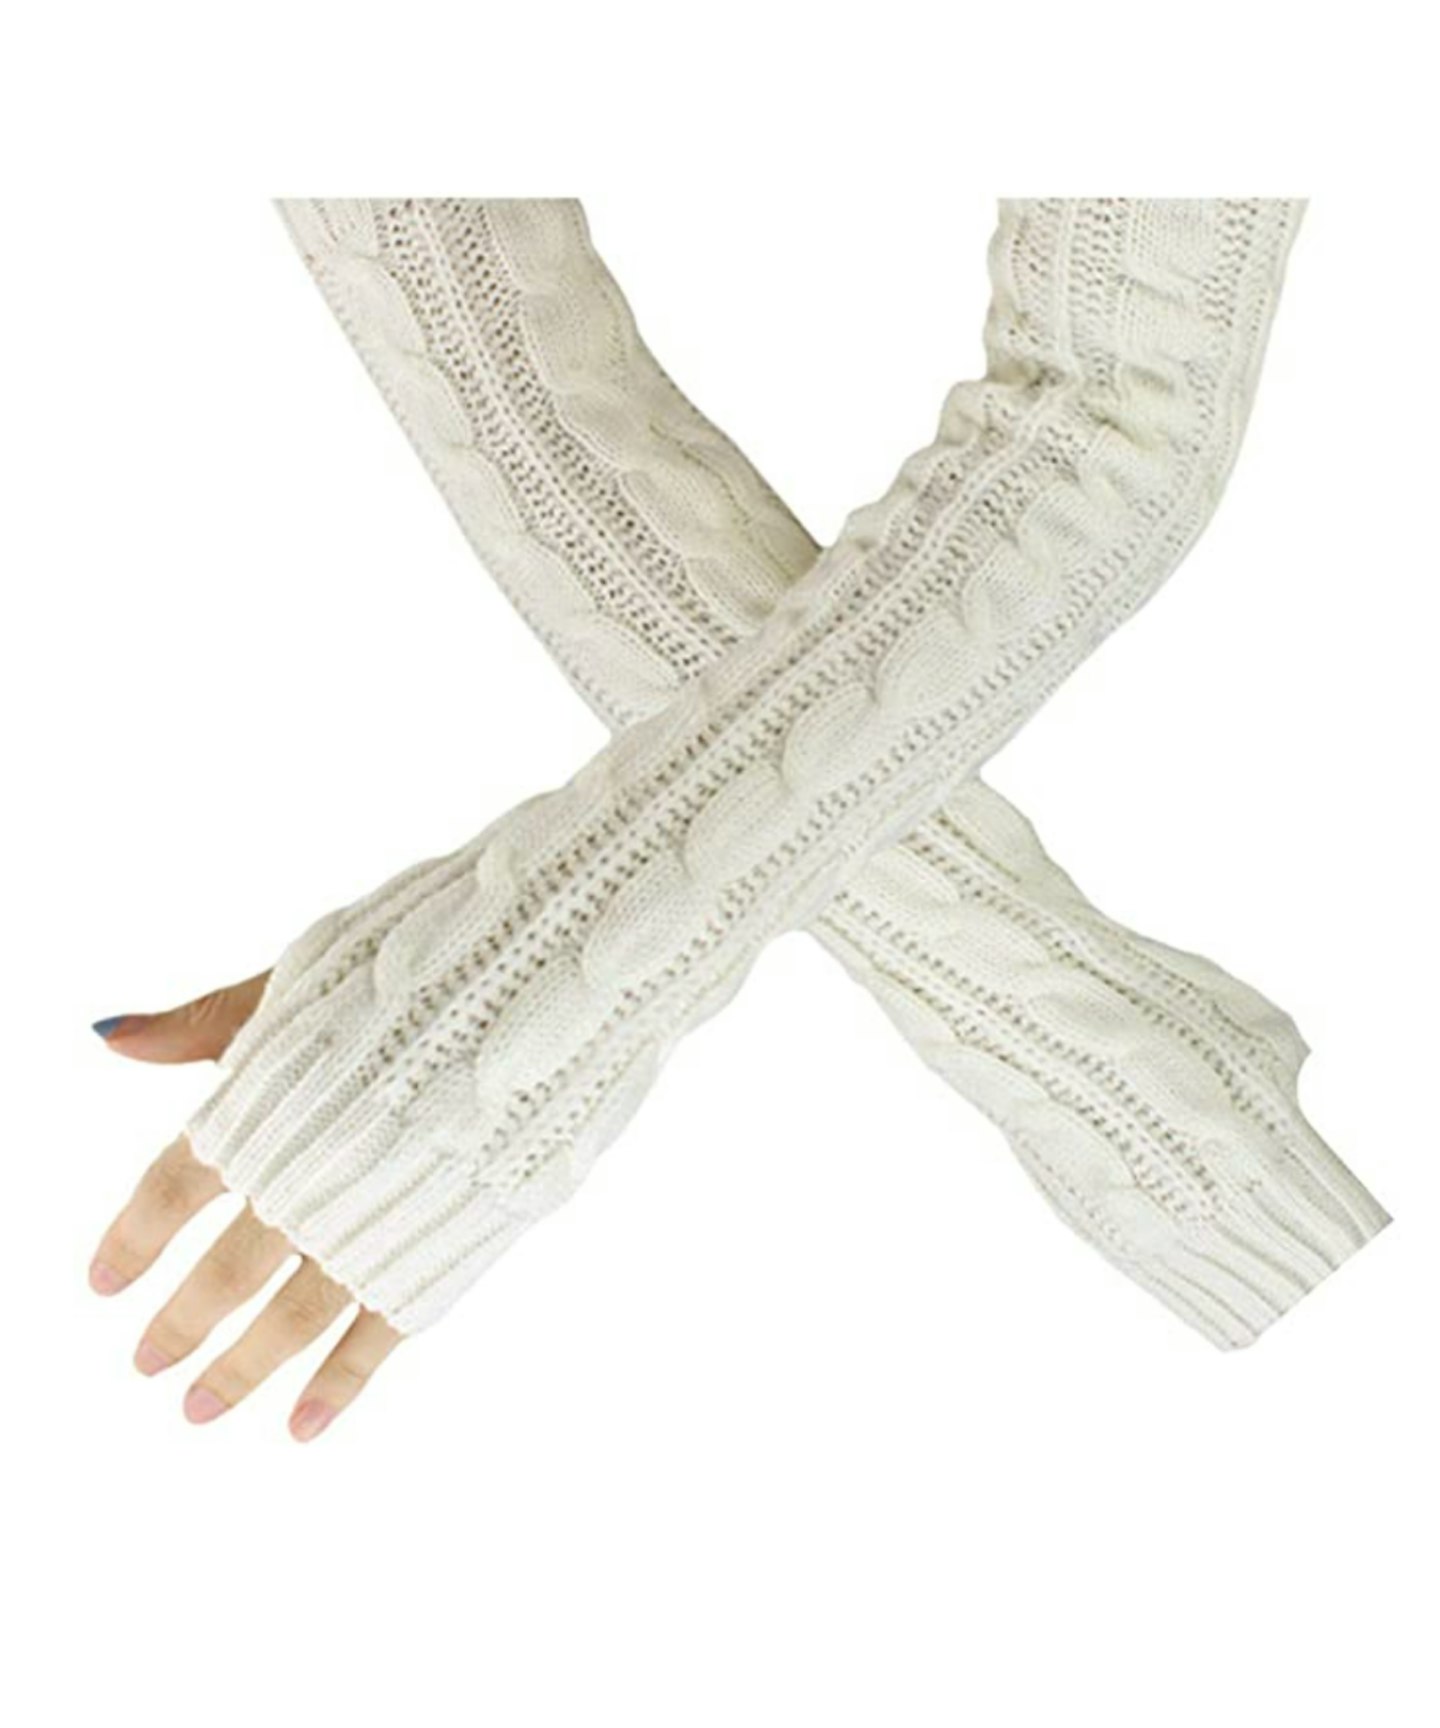 Knitted Long Gloves, Koly Women's Warm Winter Stretchy